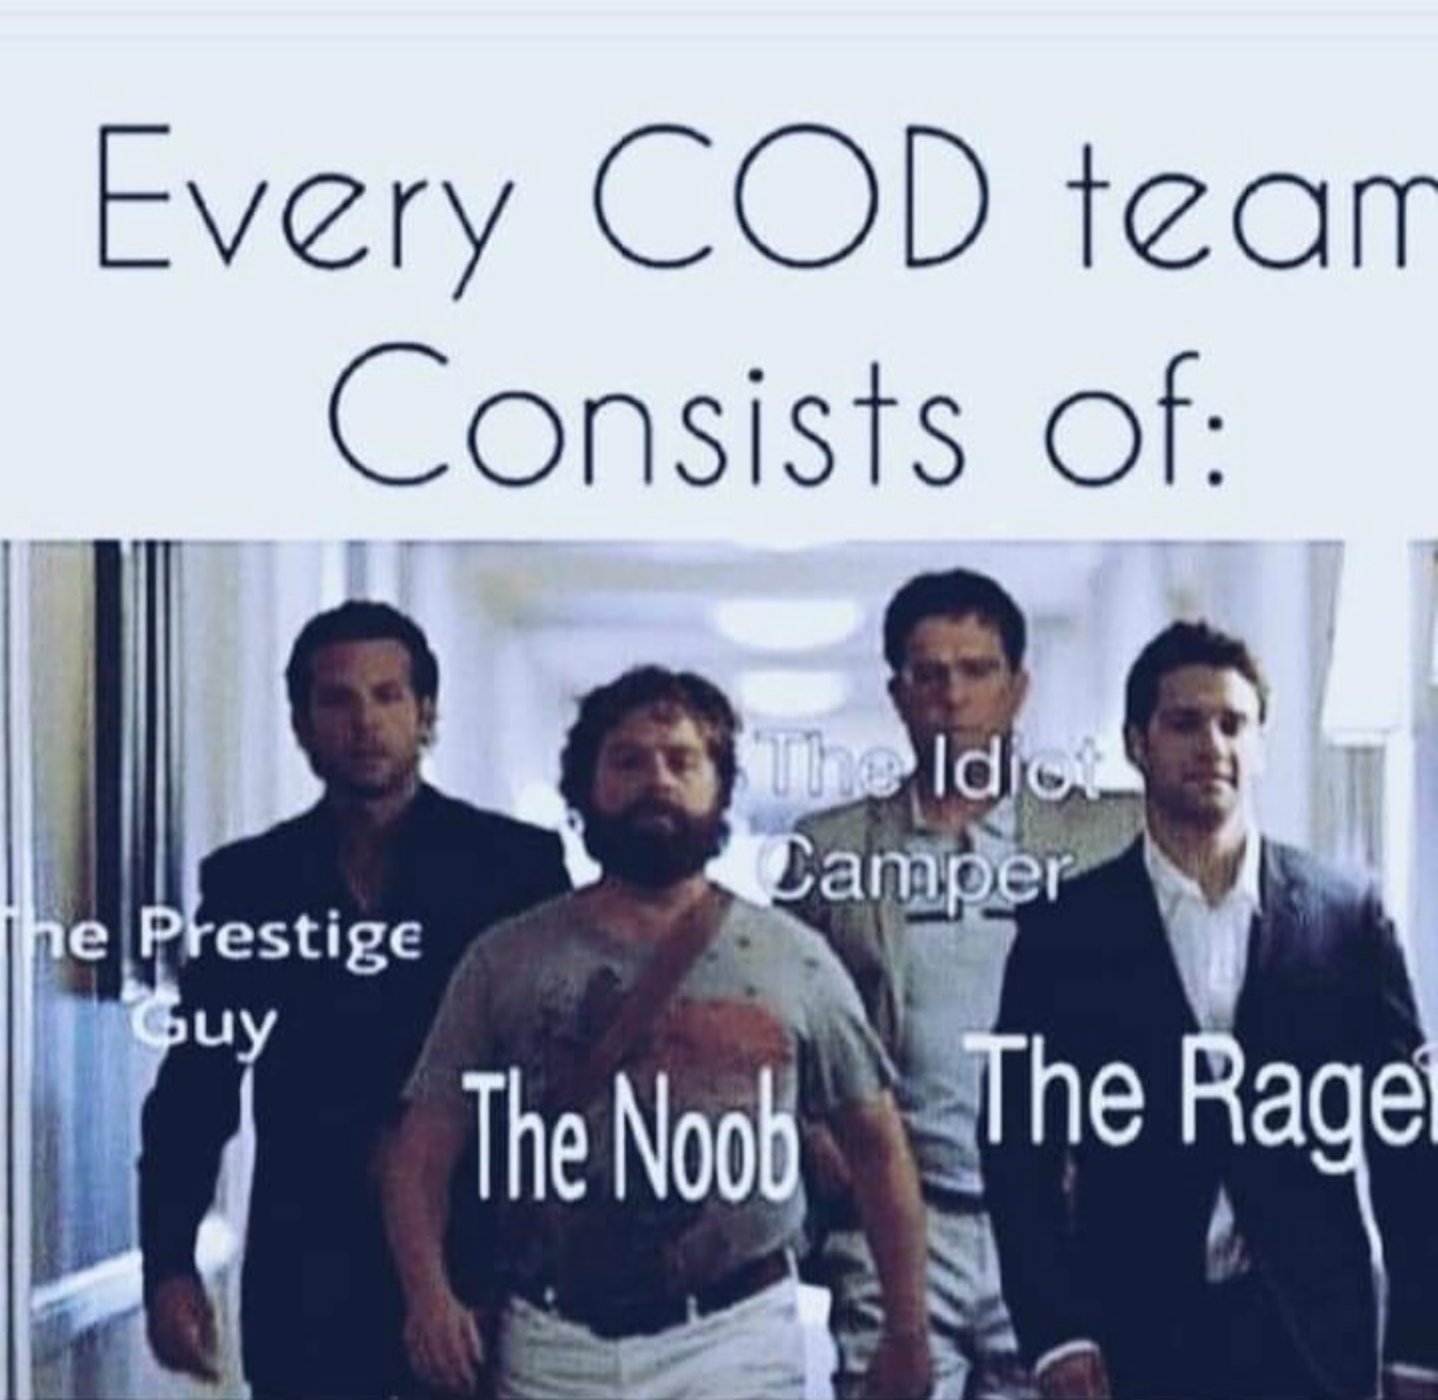 gaming memes - The Hangover - Every Cod team Consists of The Idio Camper The Prestige Guy The Noob The Ragel